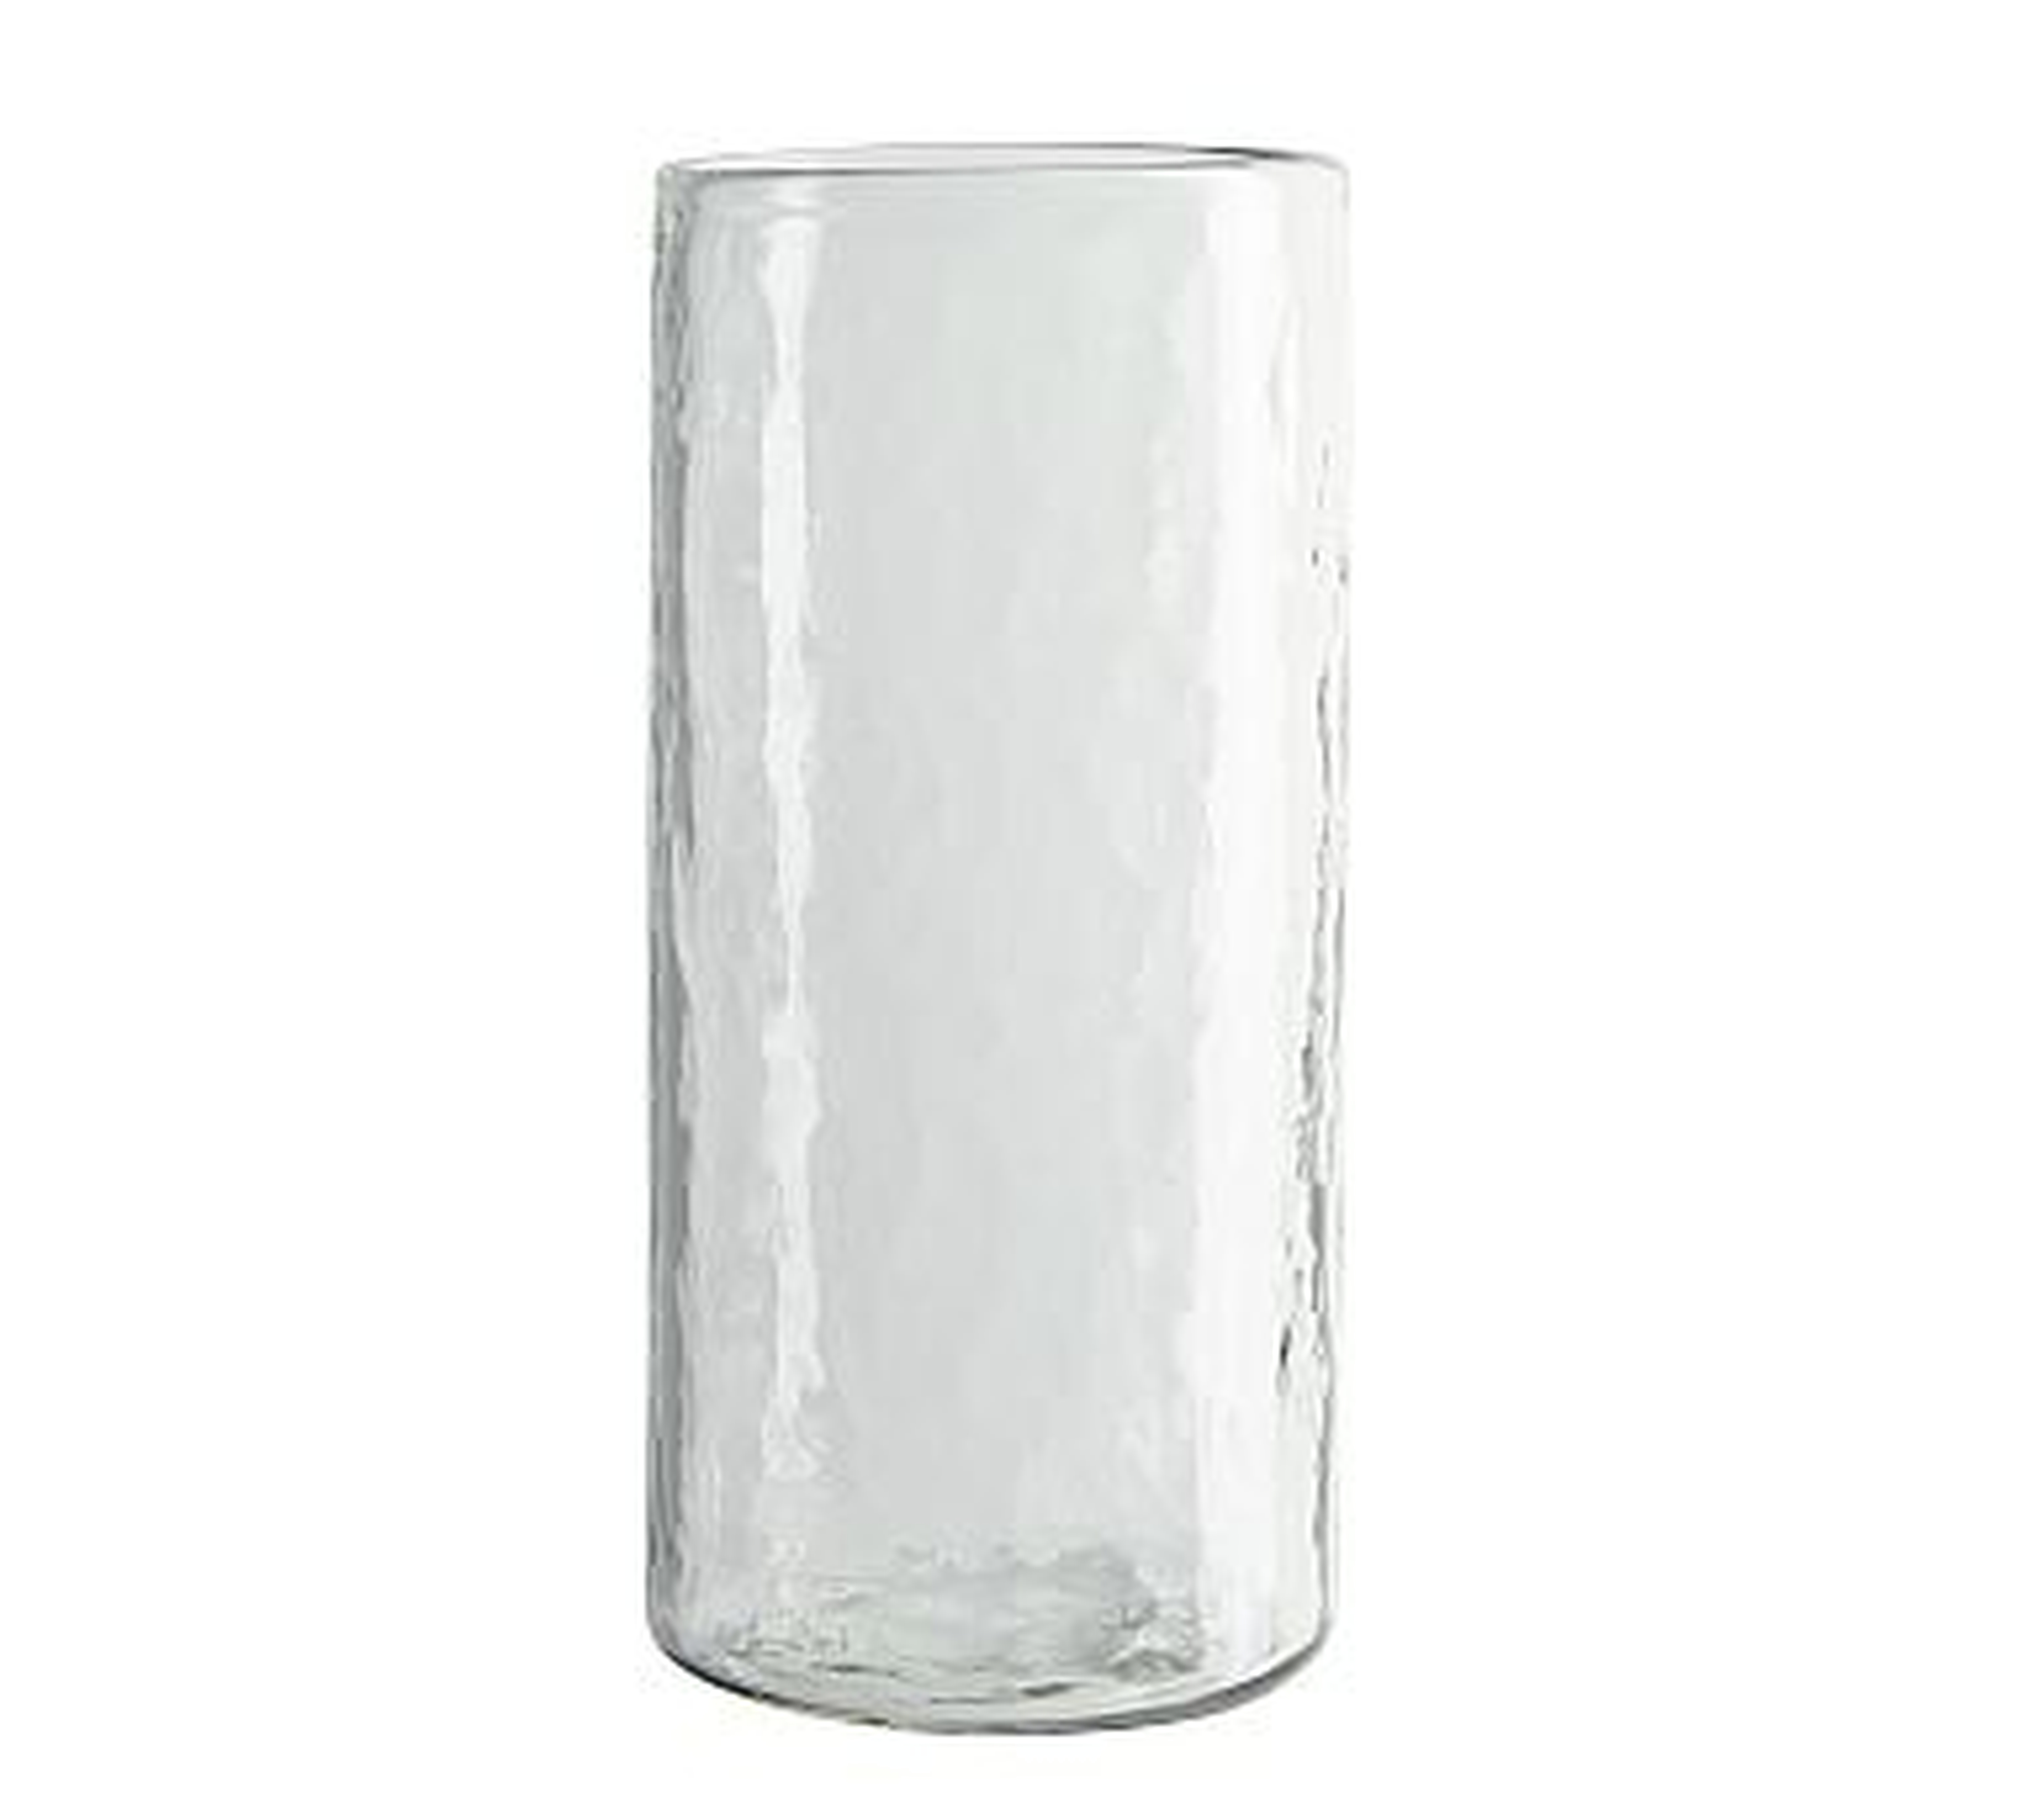 Hammered Tall Drinking Glasses, 18.6 oz., Set of 4 - Clear - Pottery Barn